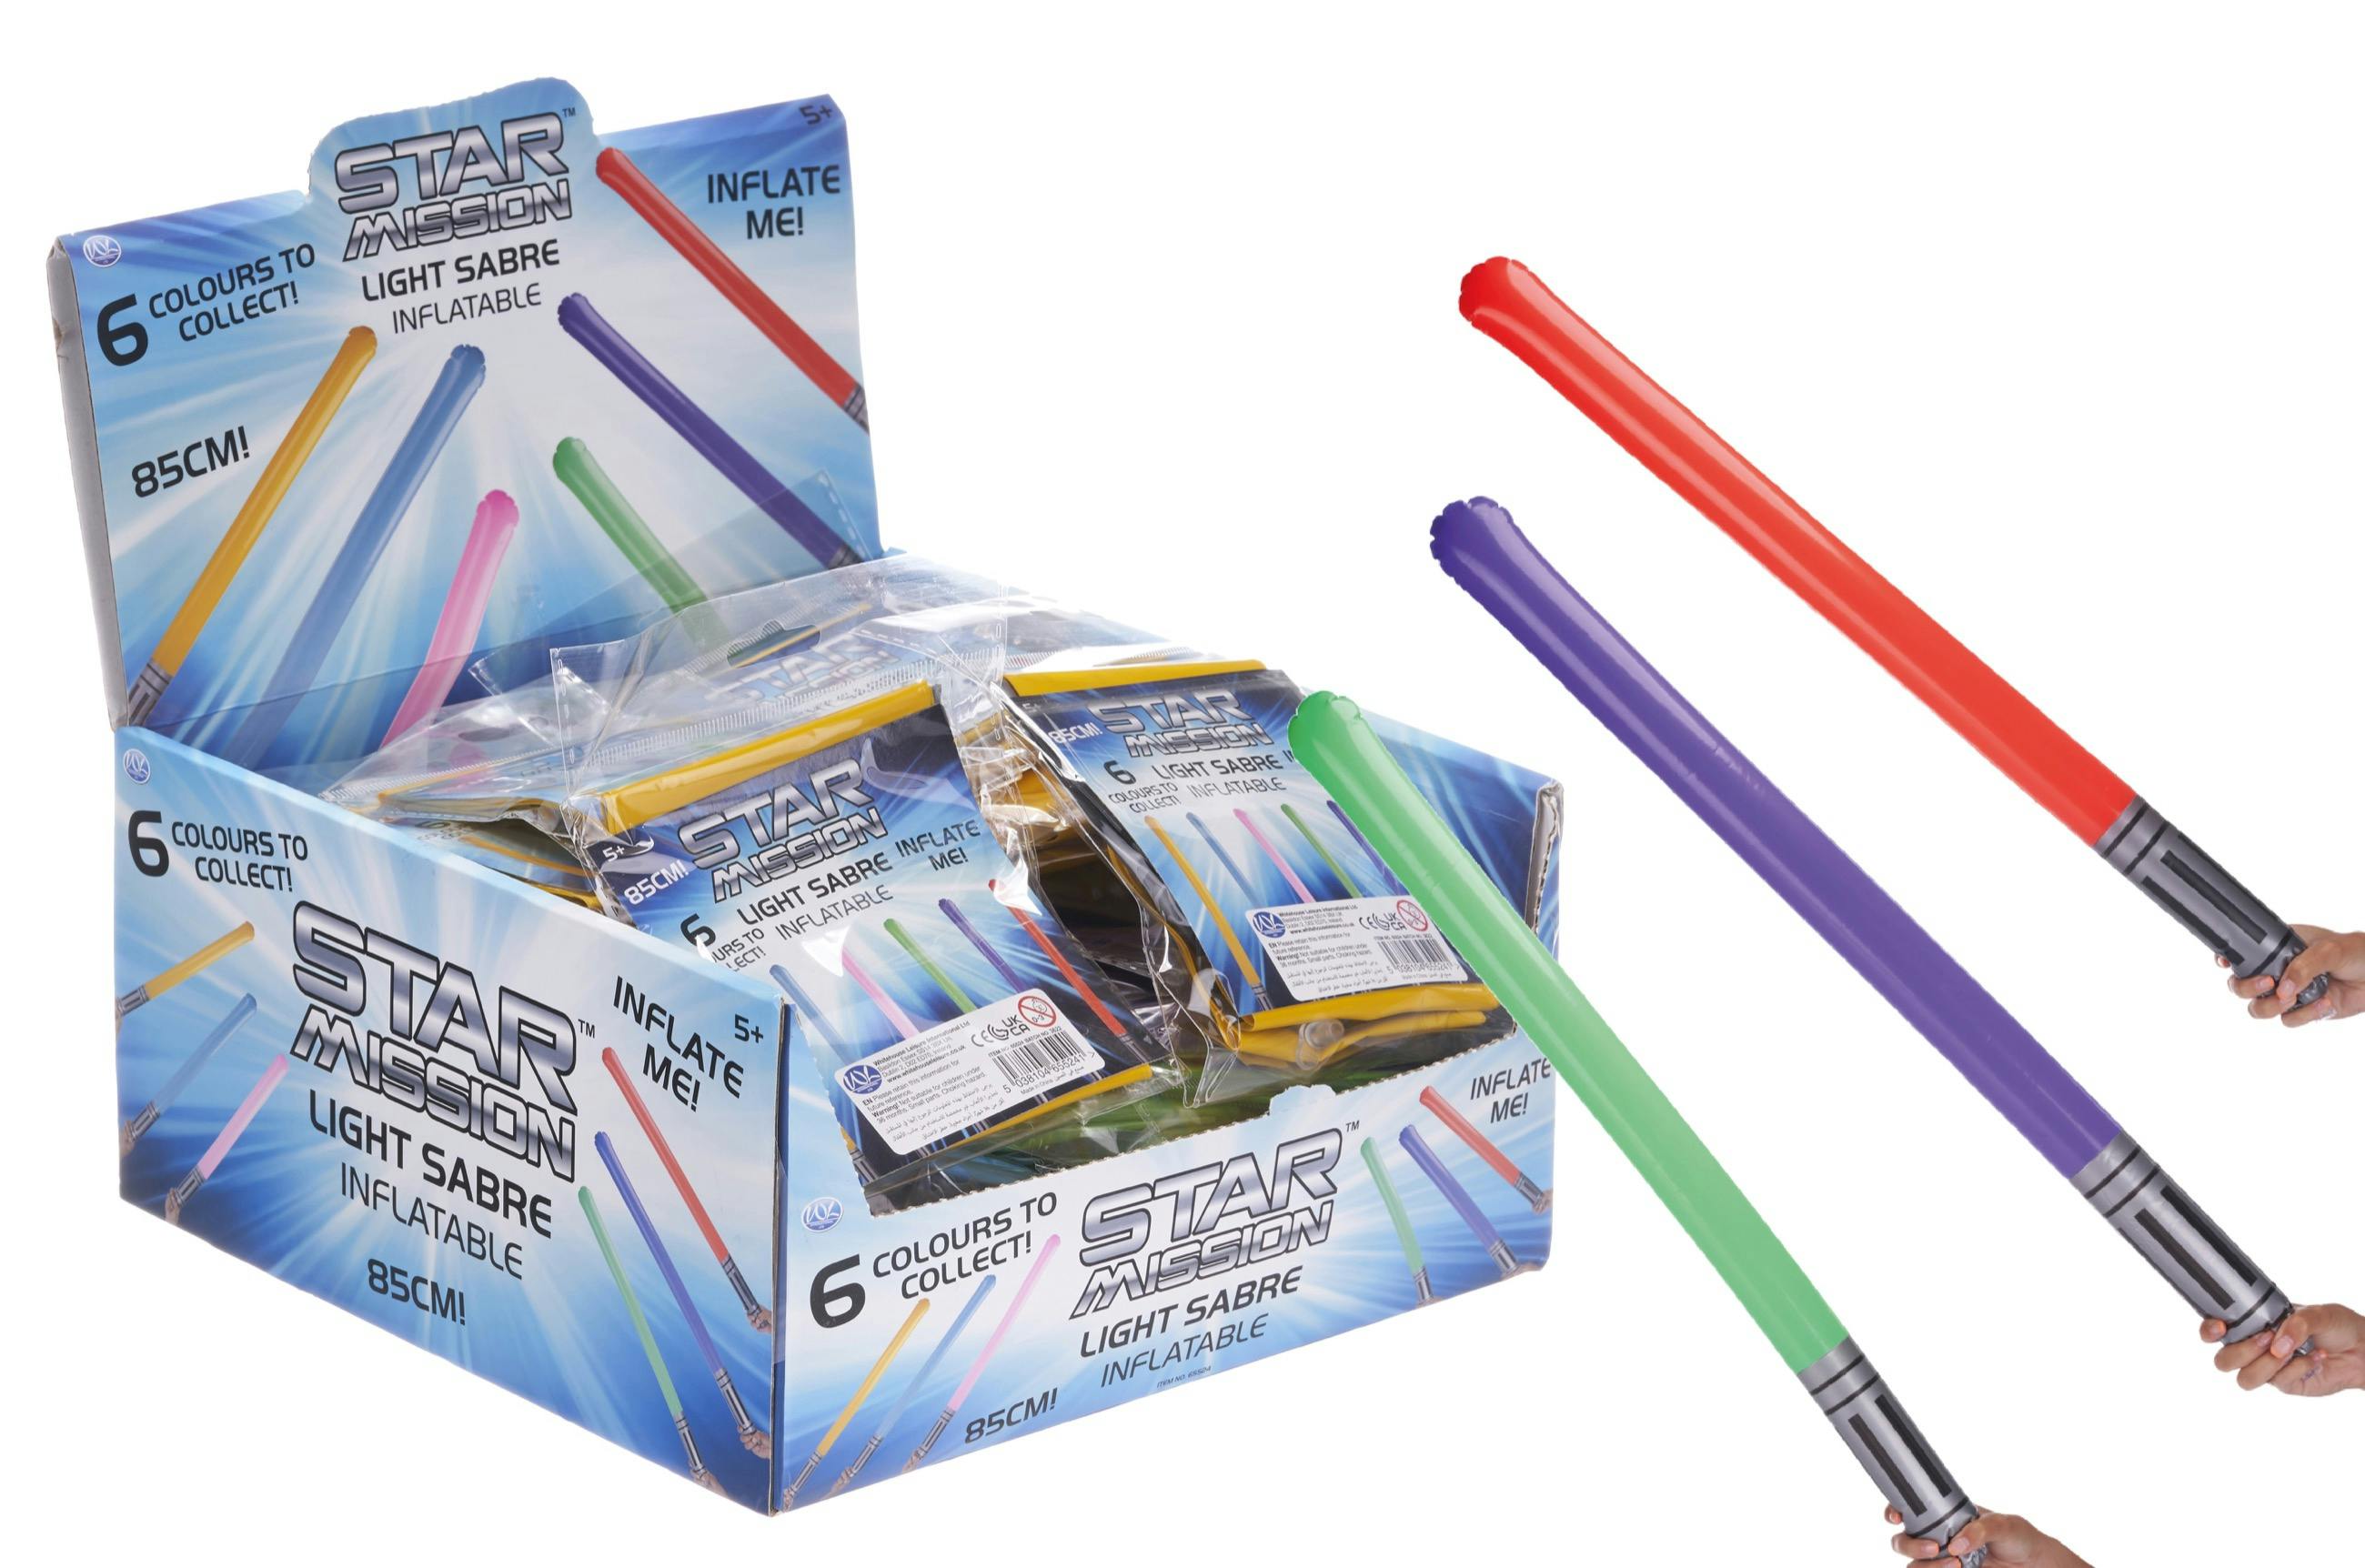 Product - Light Sabre Inflatable 